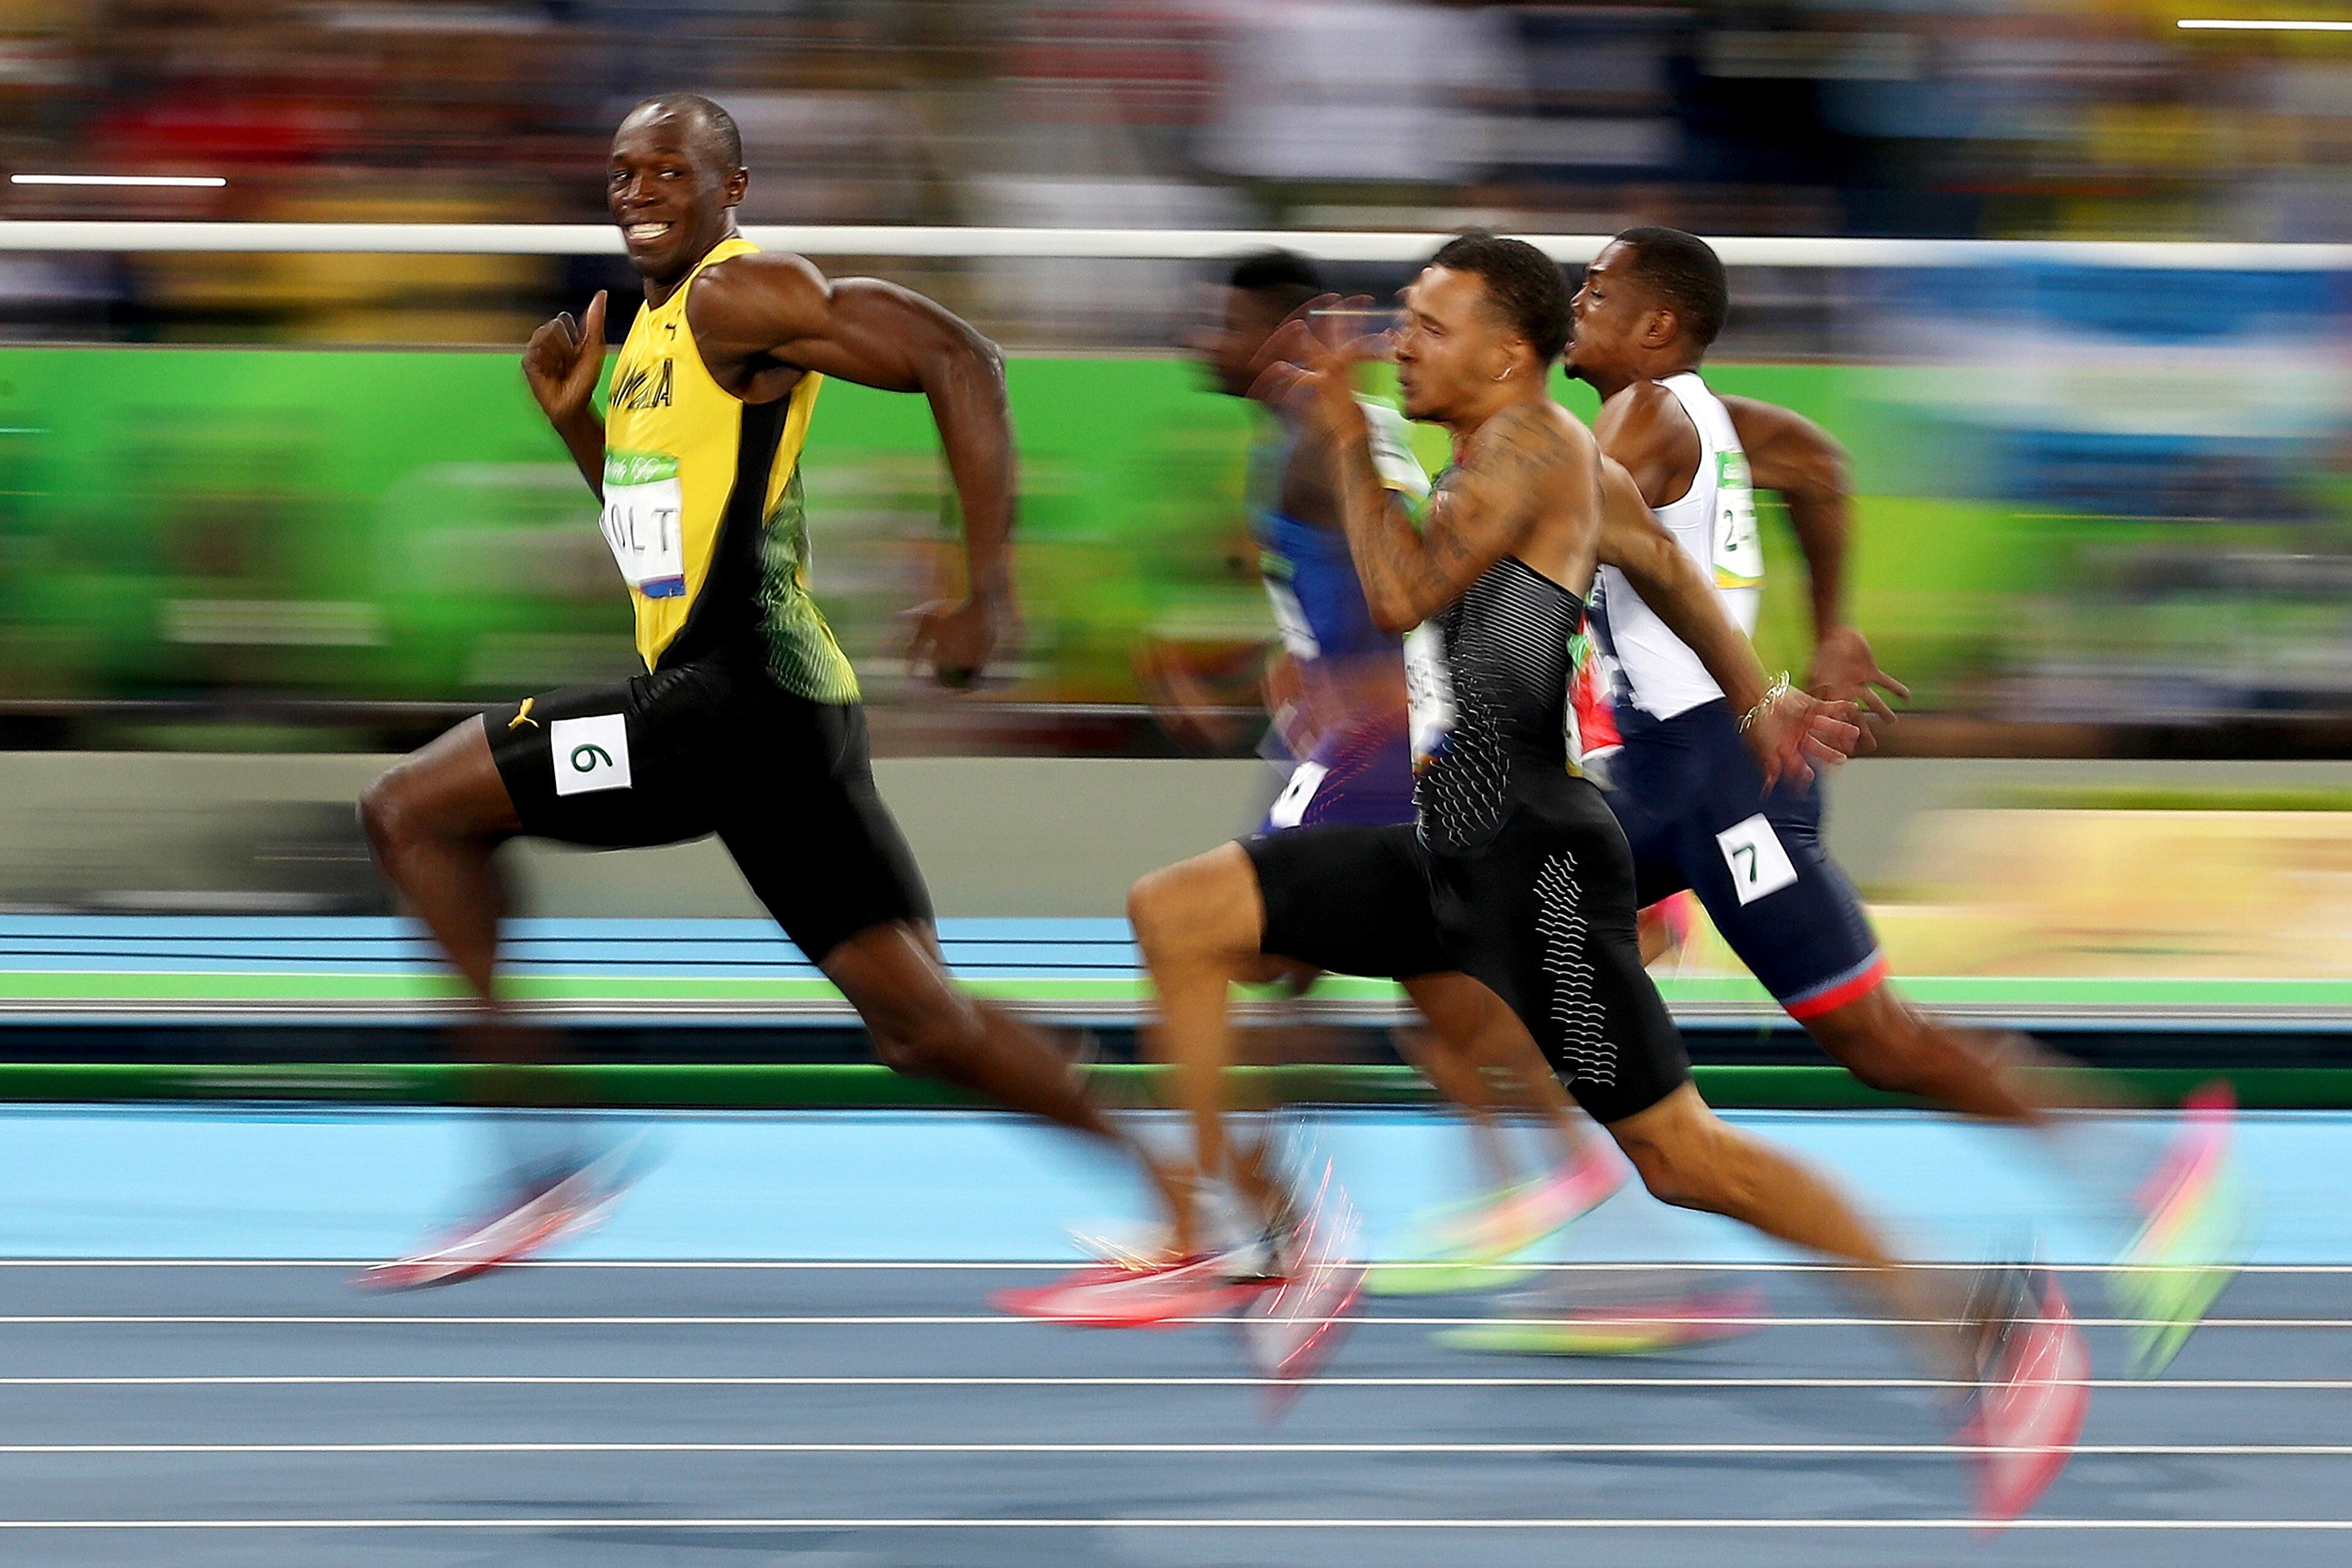 A smiling Usain Bolt competes in the men’s 100m semi-final at the Rio Olympics. Photo: Getty Images